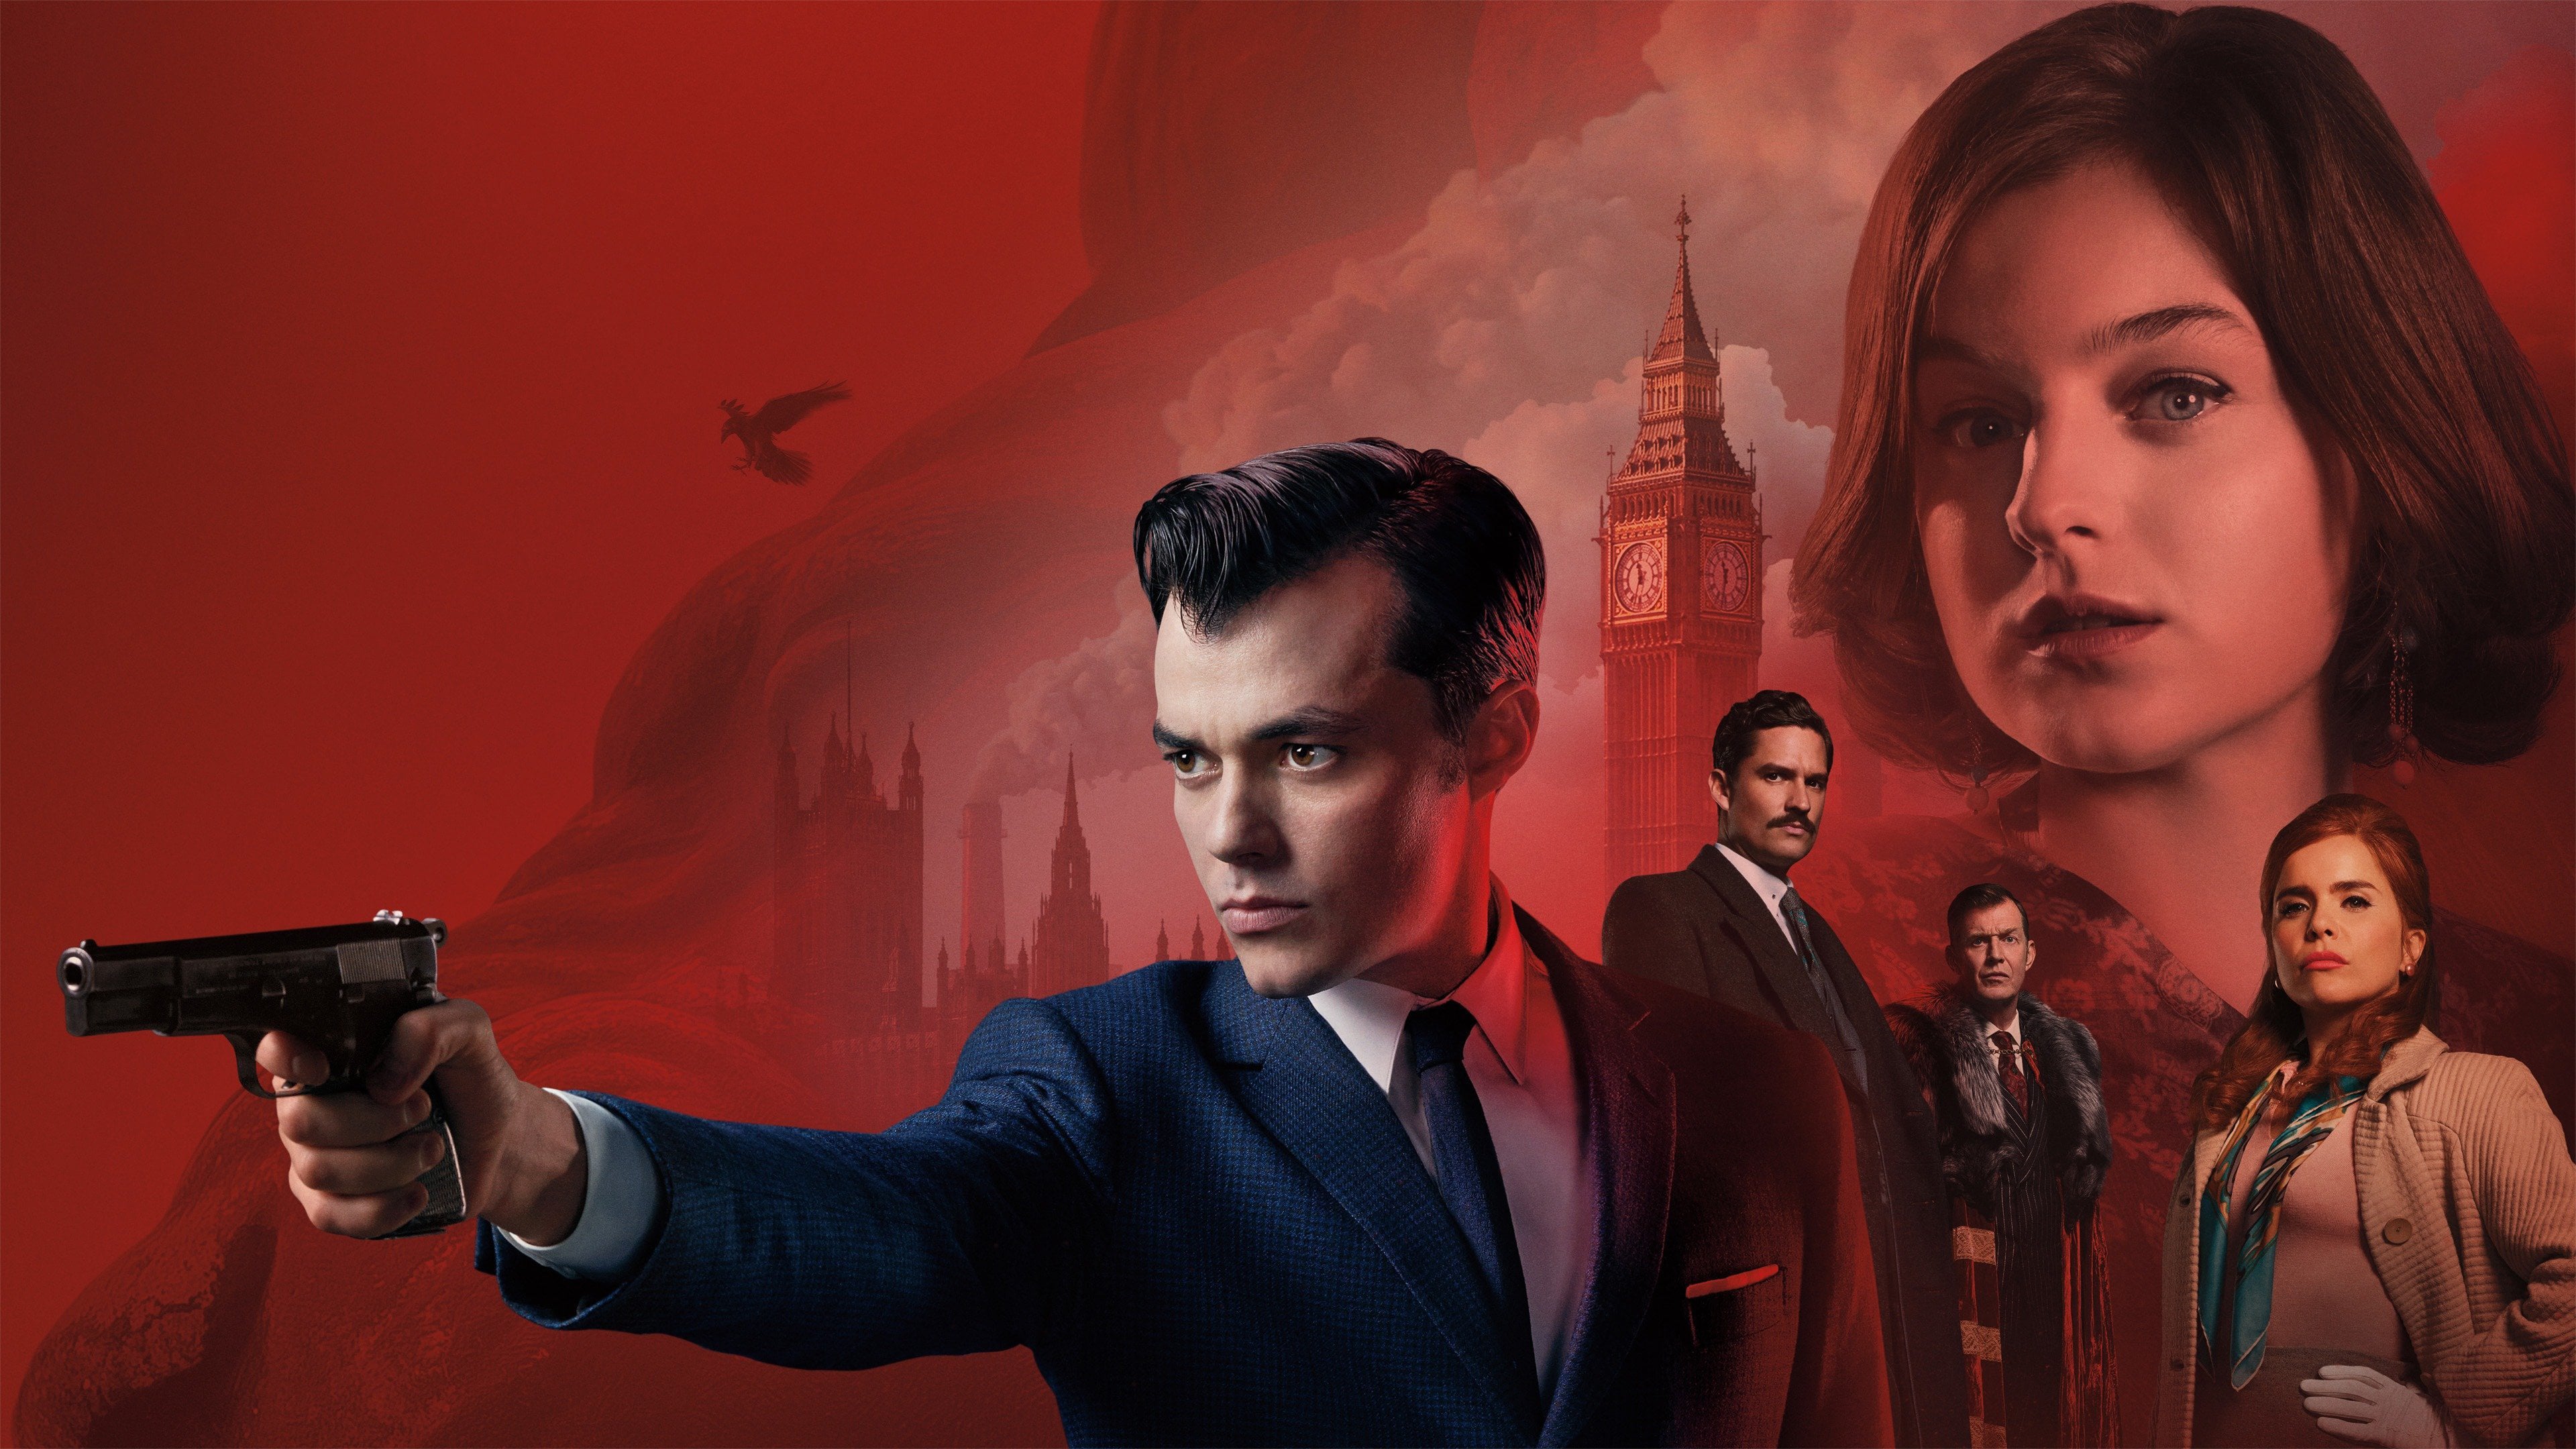 TV Show Pennyworth HD Wallpaper | Background Image